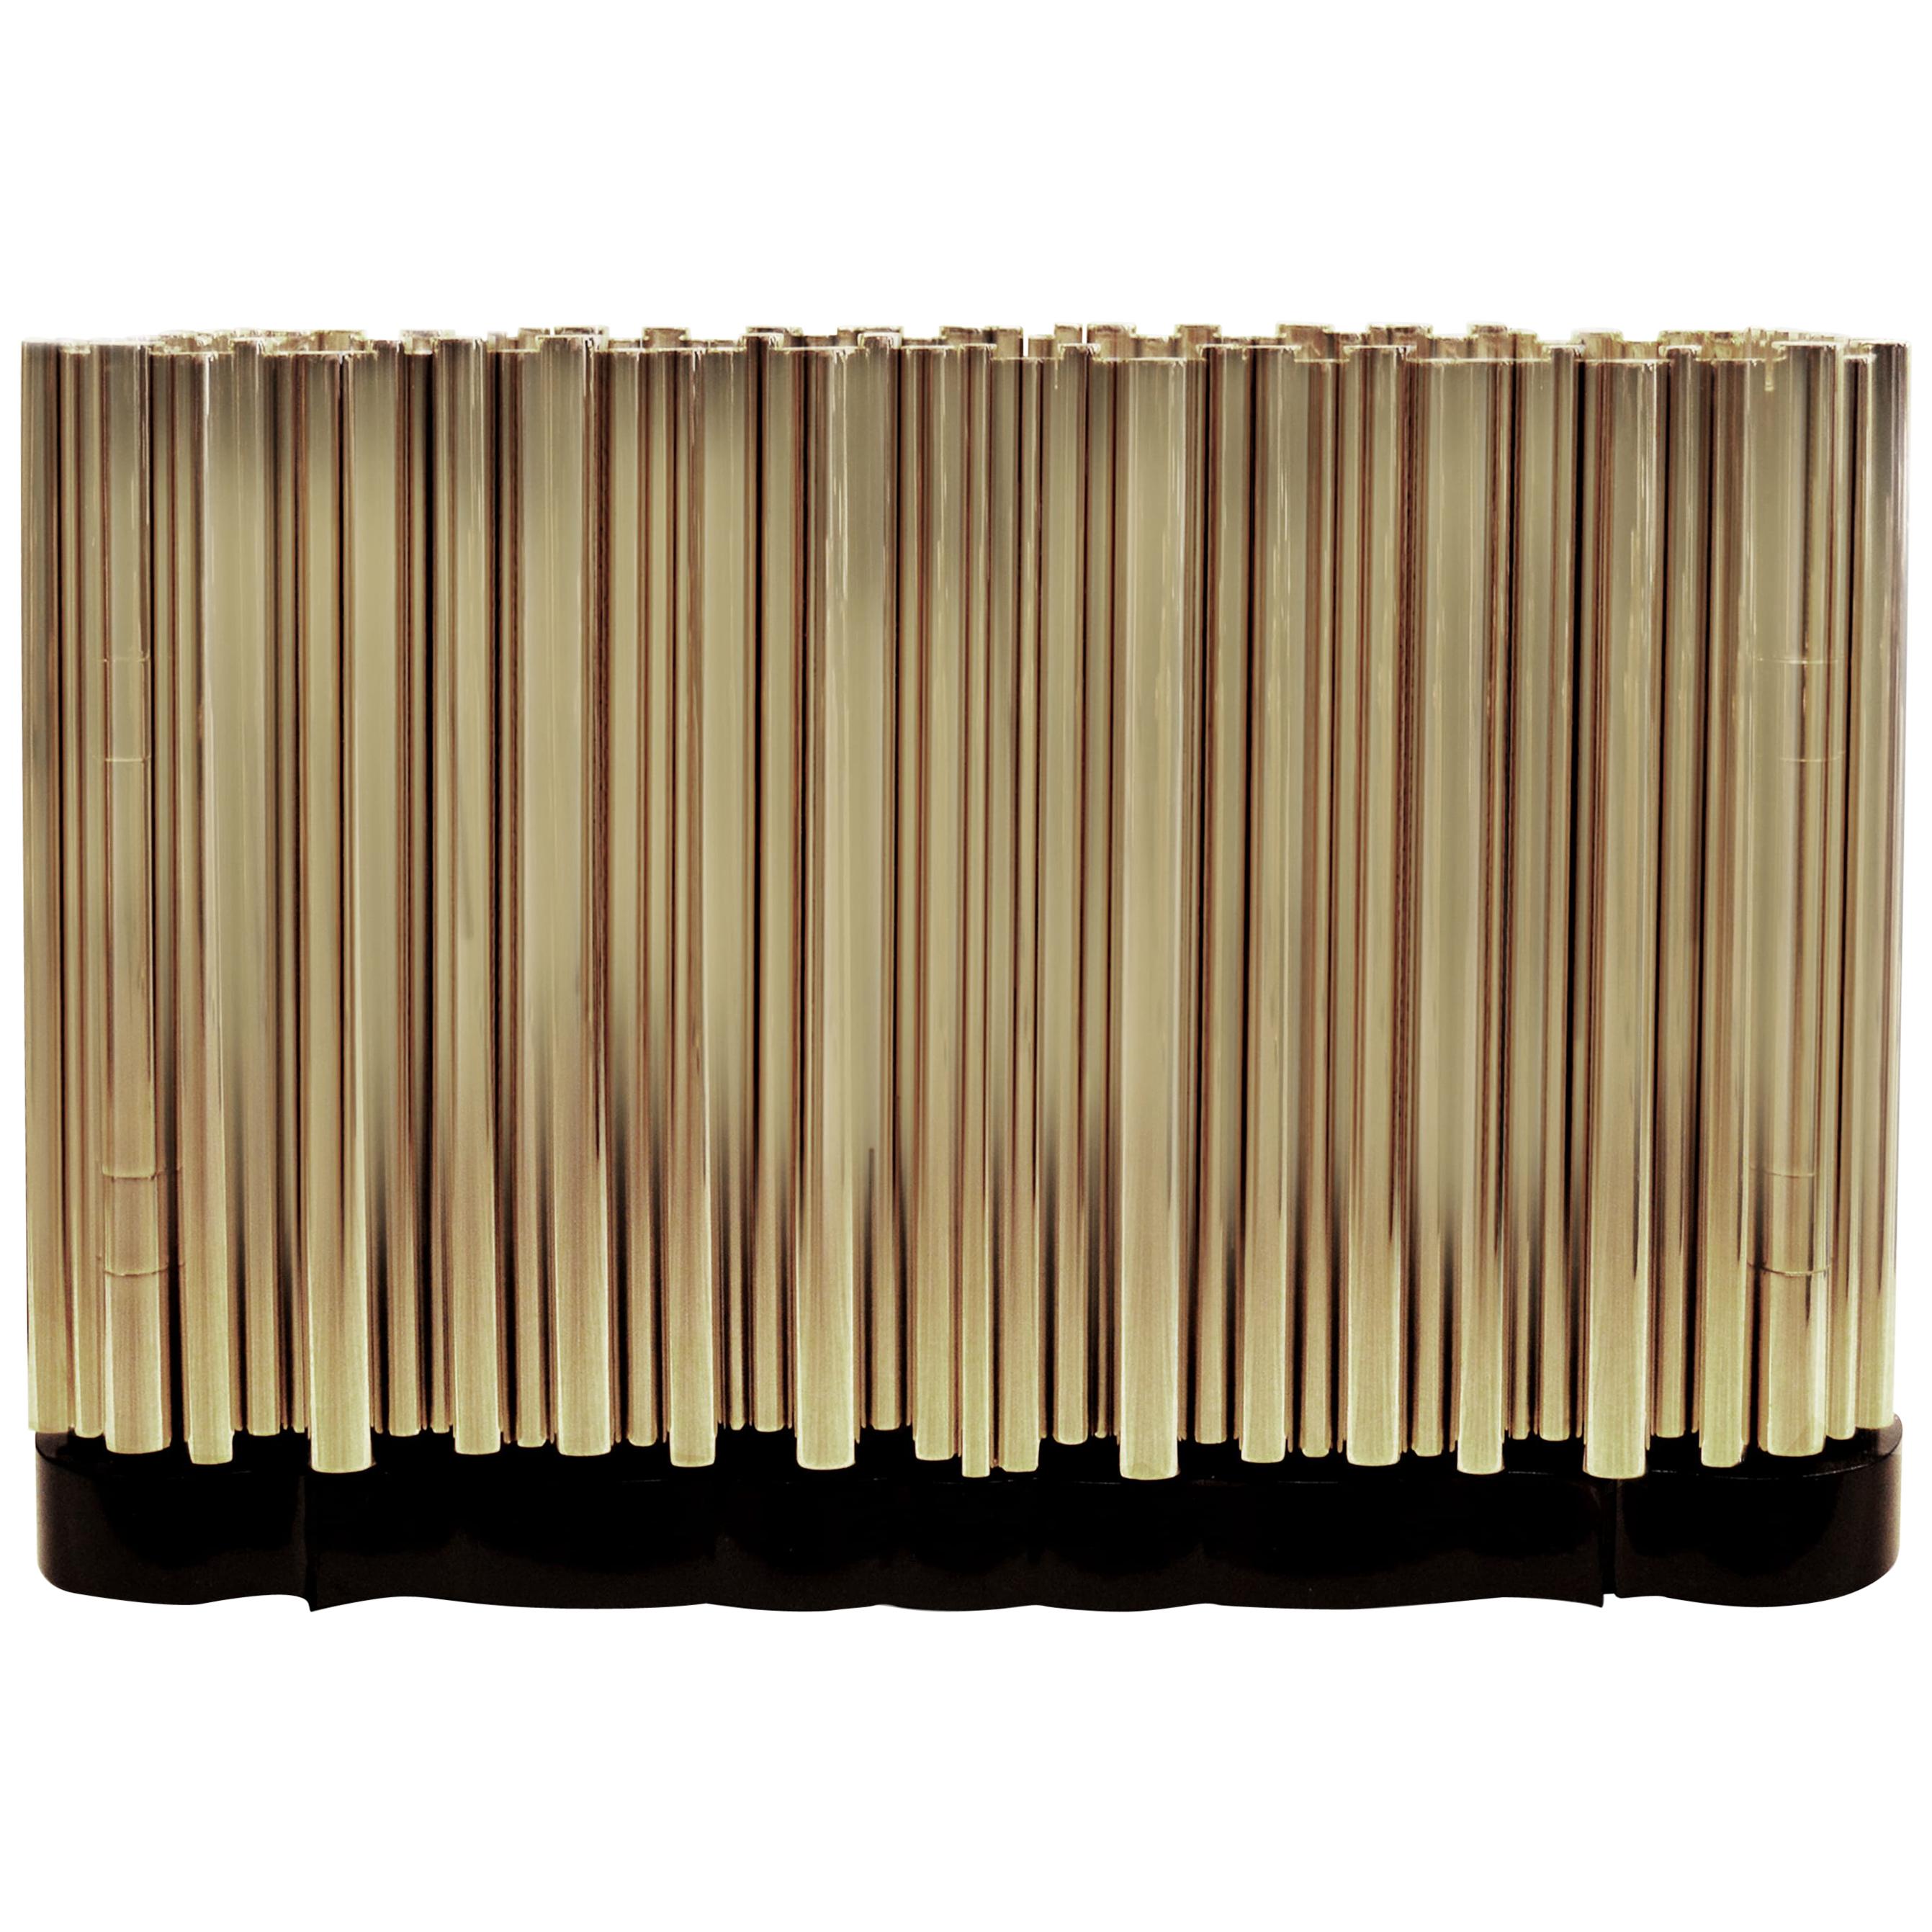 The Symphony sideboard is a statement piece whose modern design emulates the grandeur of classic church organ pipes. Synonym of innovation and flawless execution, the Symphony is one of the most exquisite pieces to grace the Limited Edition